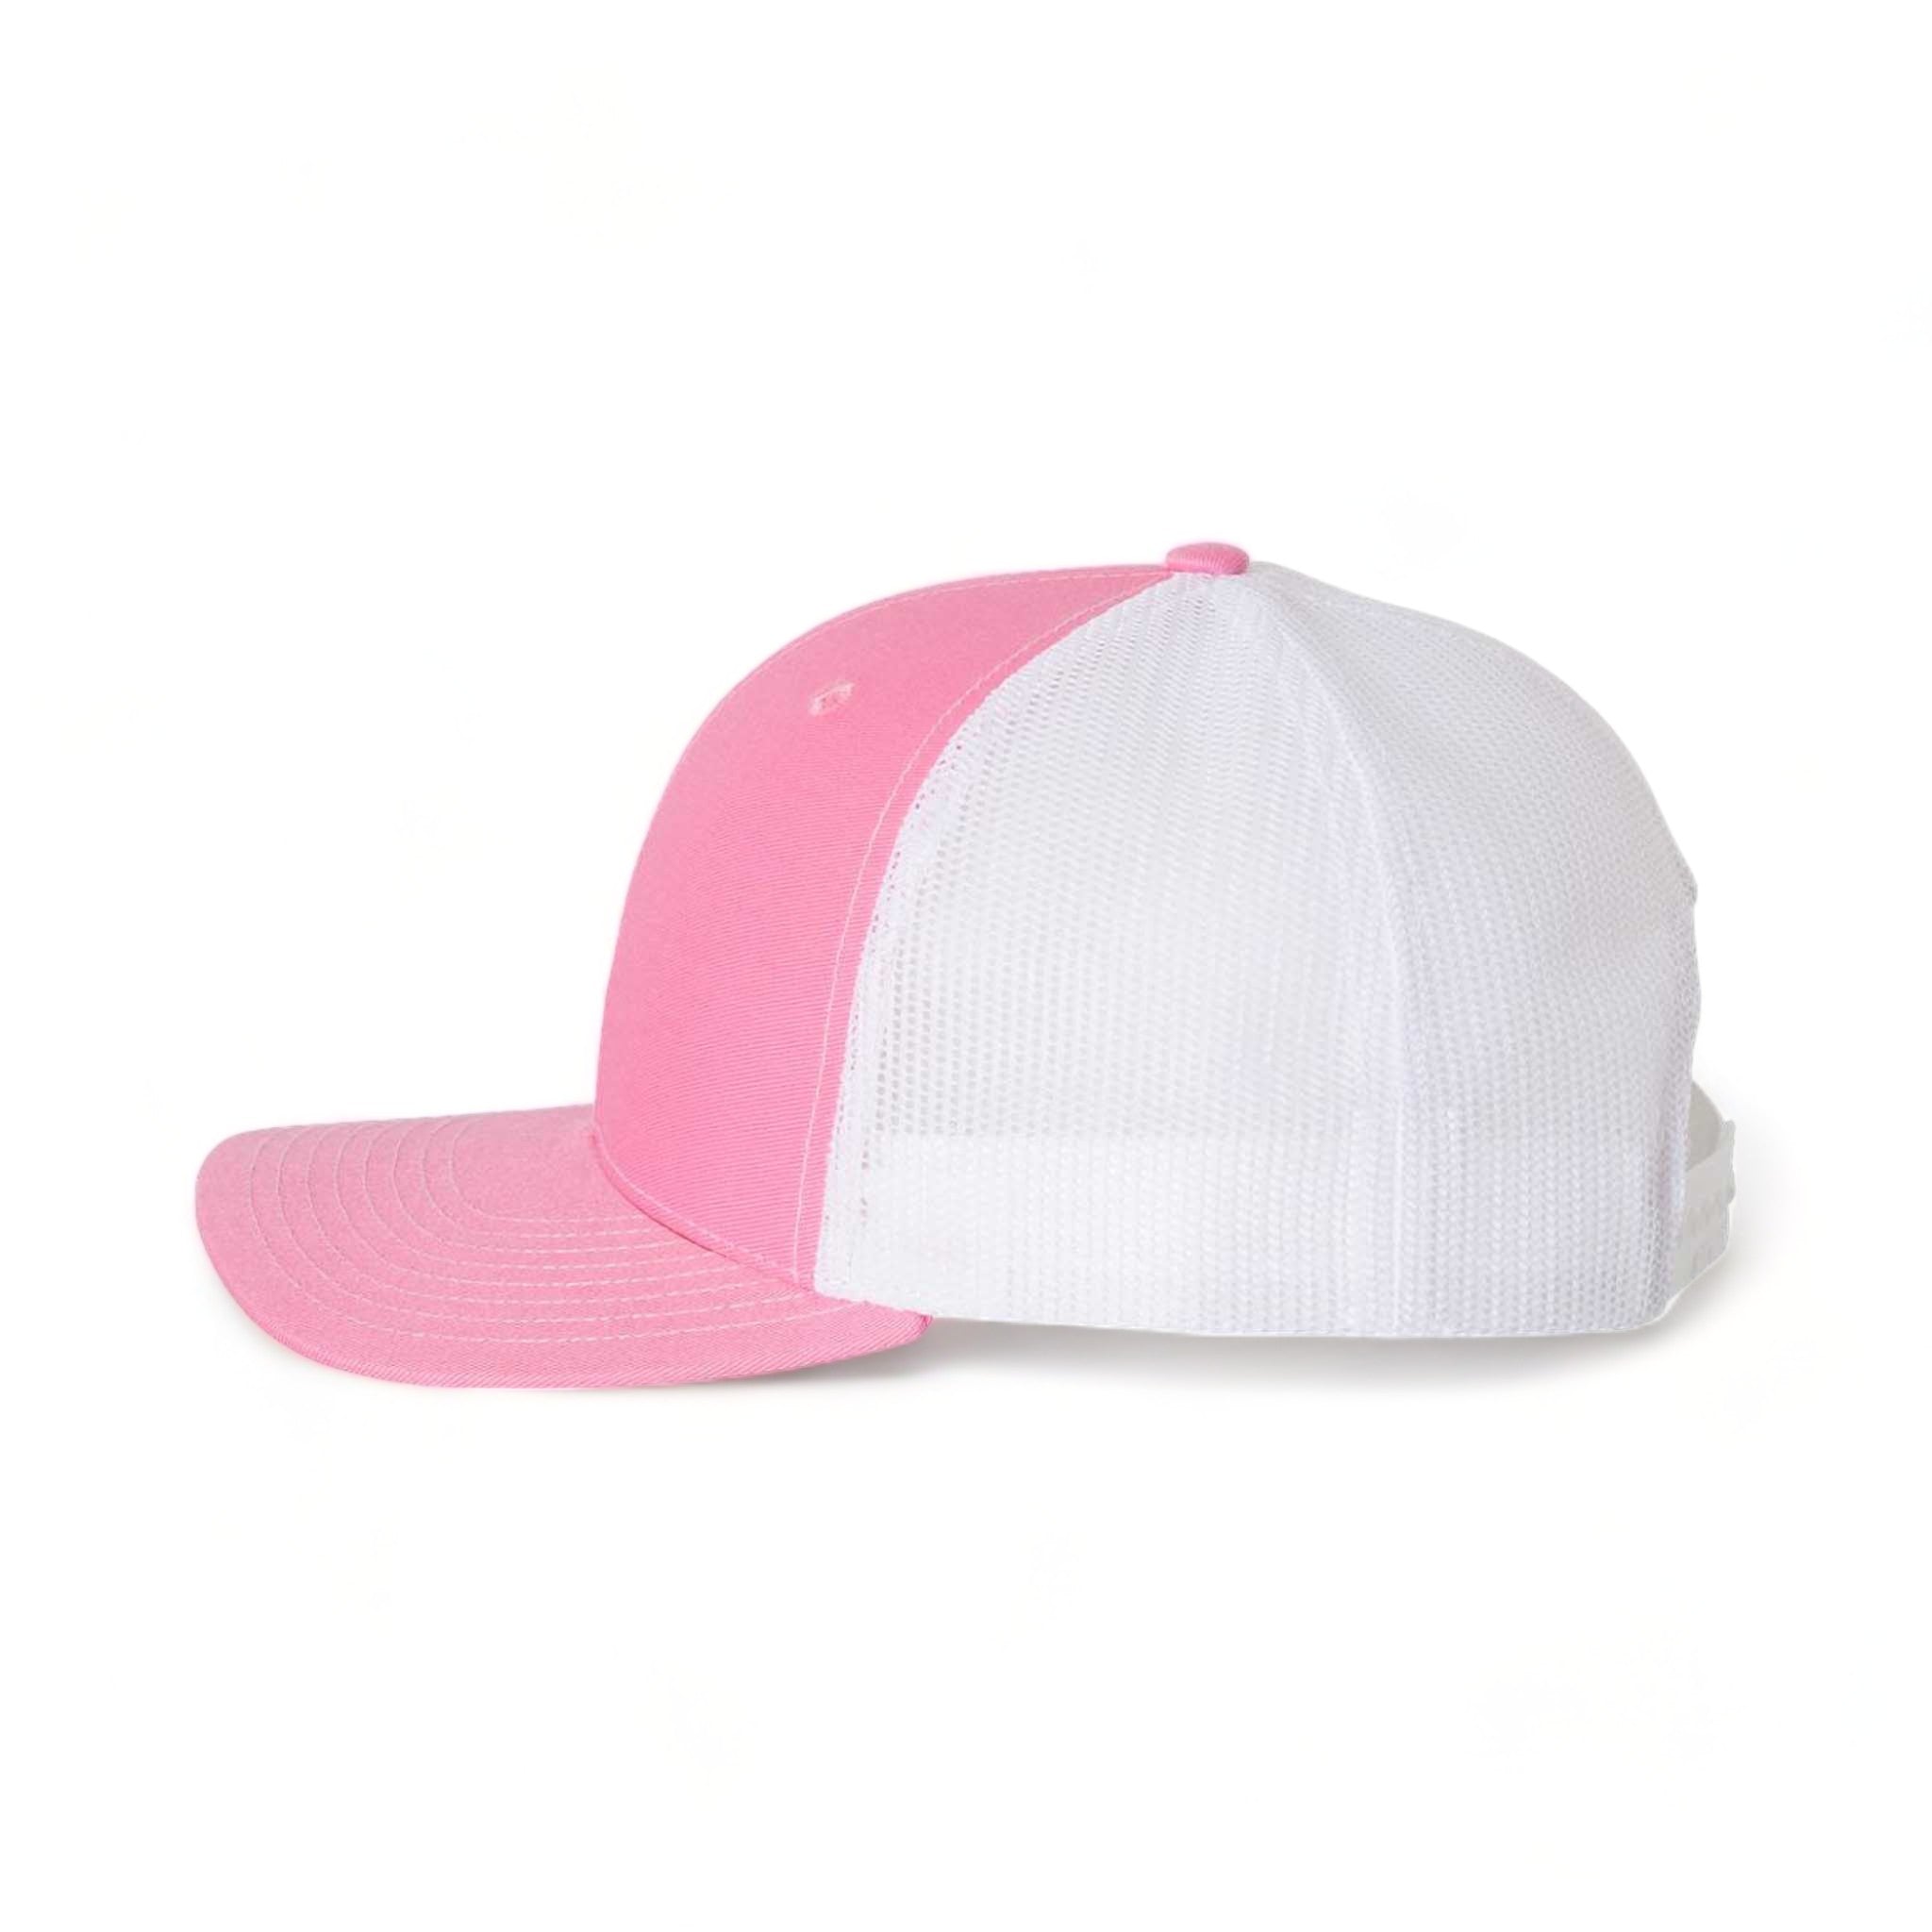 Side view of Richardson 112 custom hat in hot pink and white